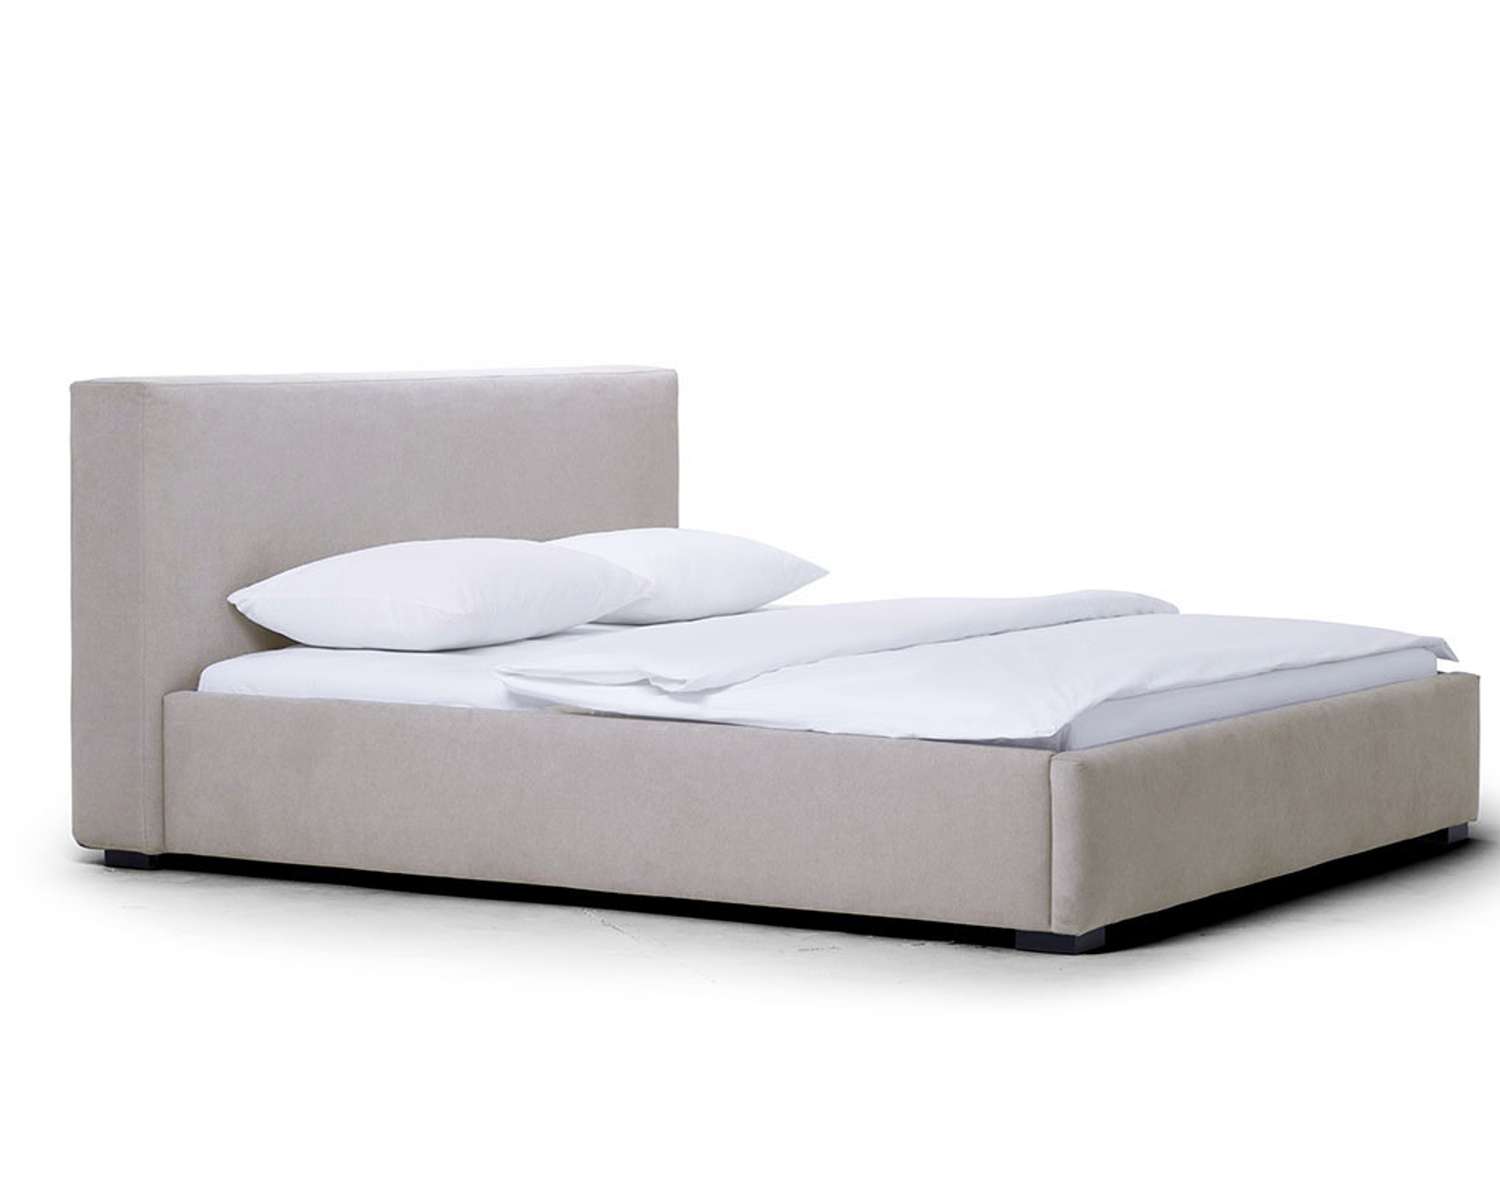 Showroomodel boxspringlook Cube bed